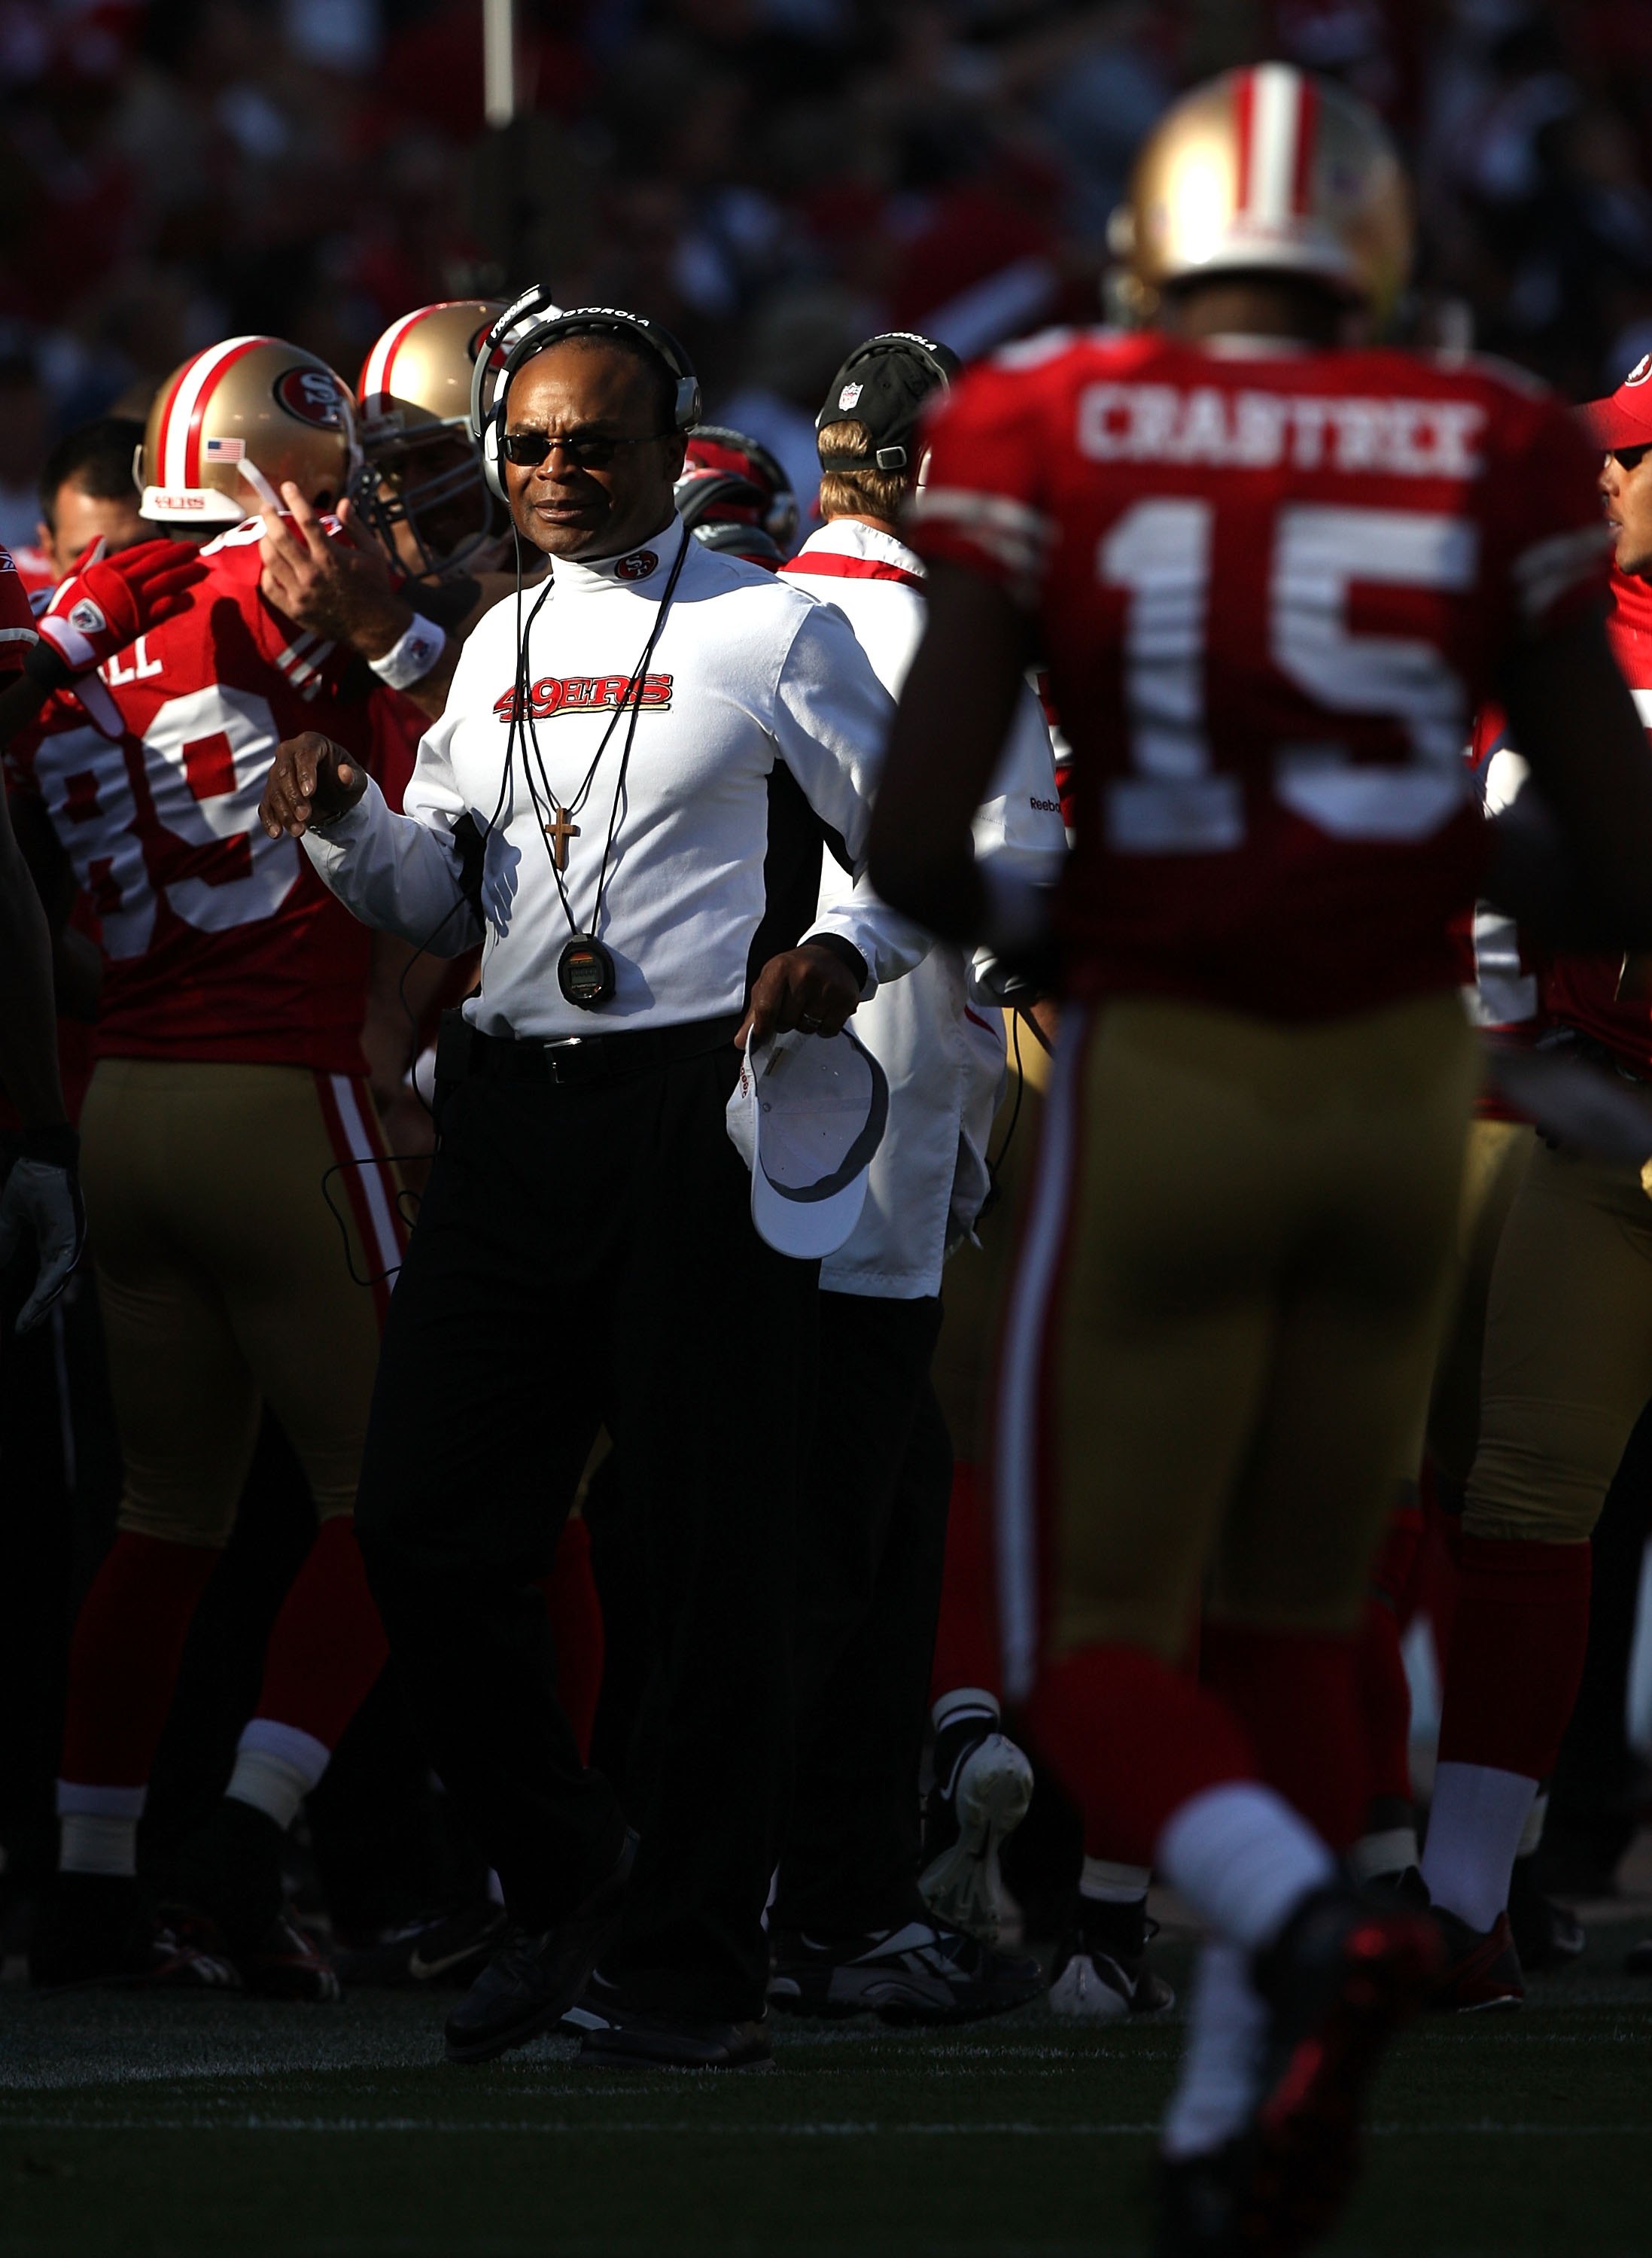 SAN FRANCISCO - NOVEMBER 08:  Head coach Mike Singletary of the San Francisco 49ers looks on with Michael Crabtree #15 against the Tennessee Titans during an NFL game on November 8, 2009 at Candlestick Park in San Francisco, California.  (Photo by Jed Jac